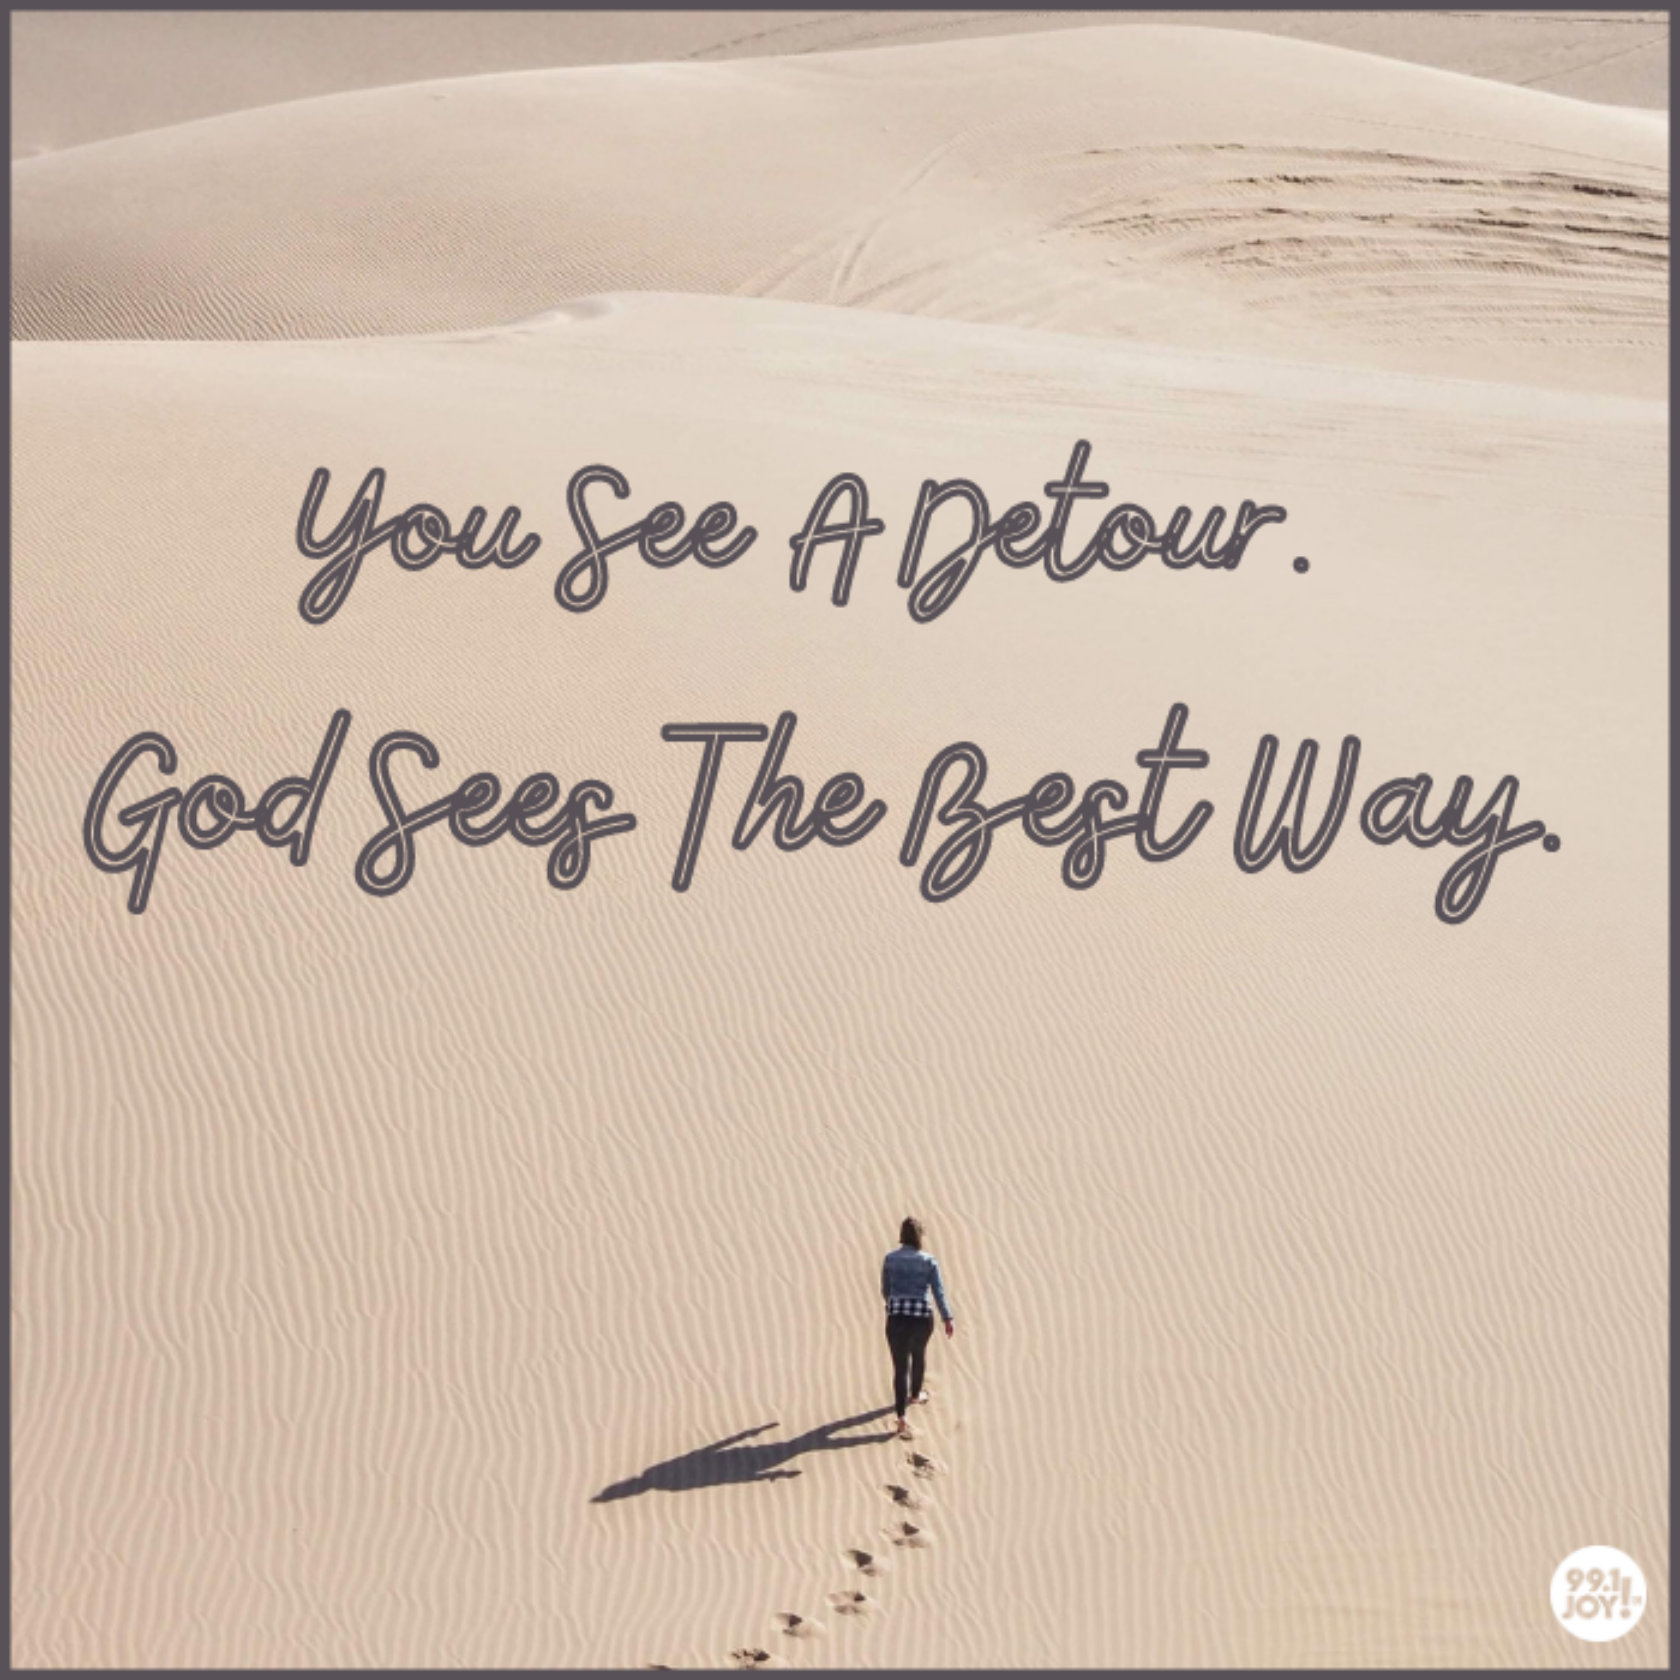 You See A Detour. God Sees The Best Way.